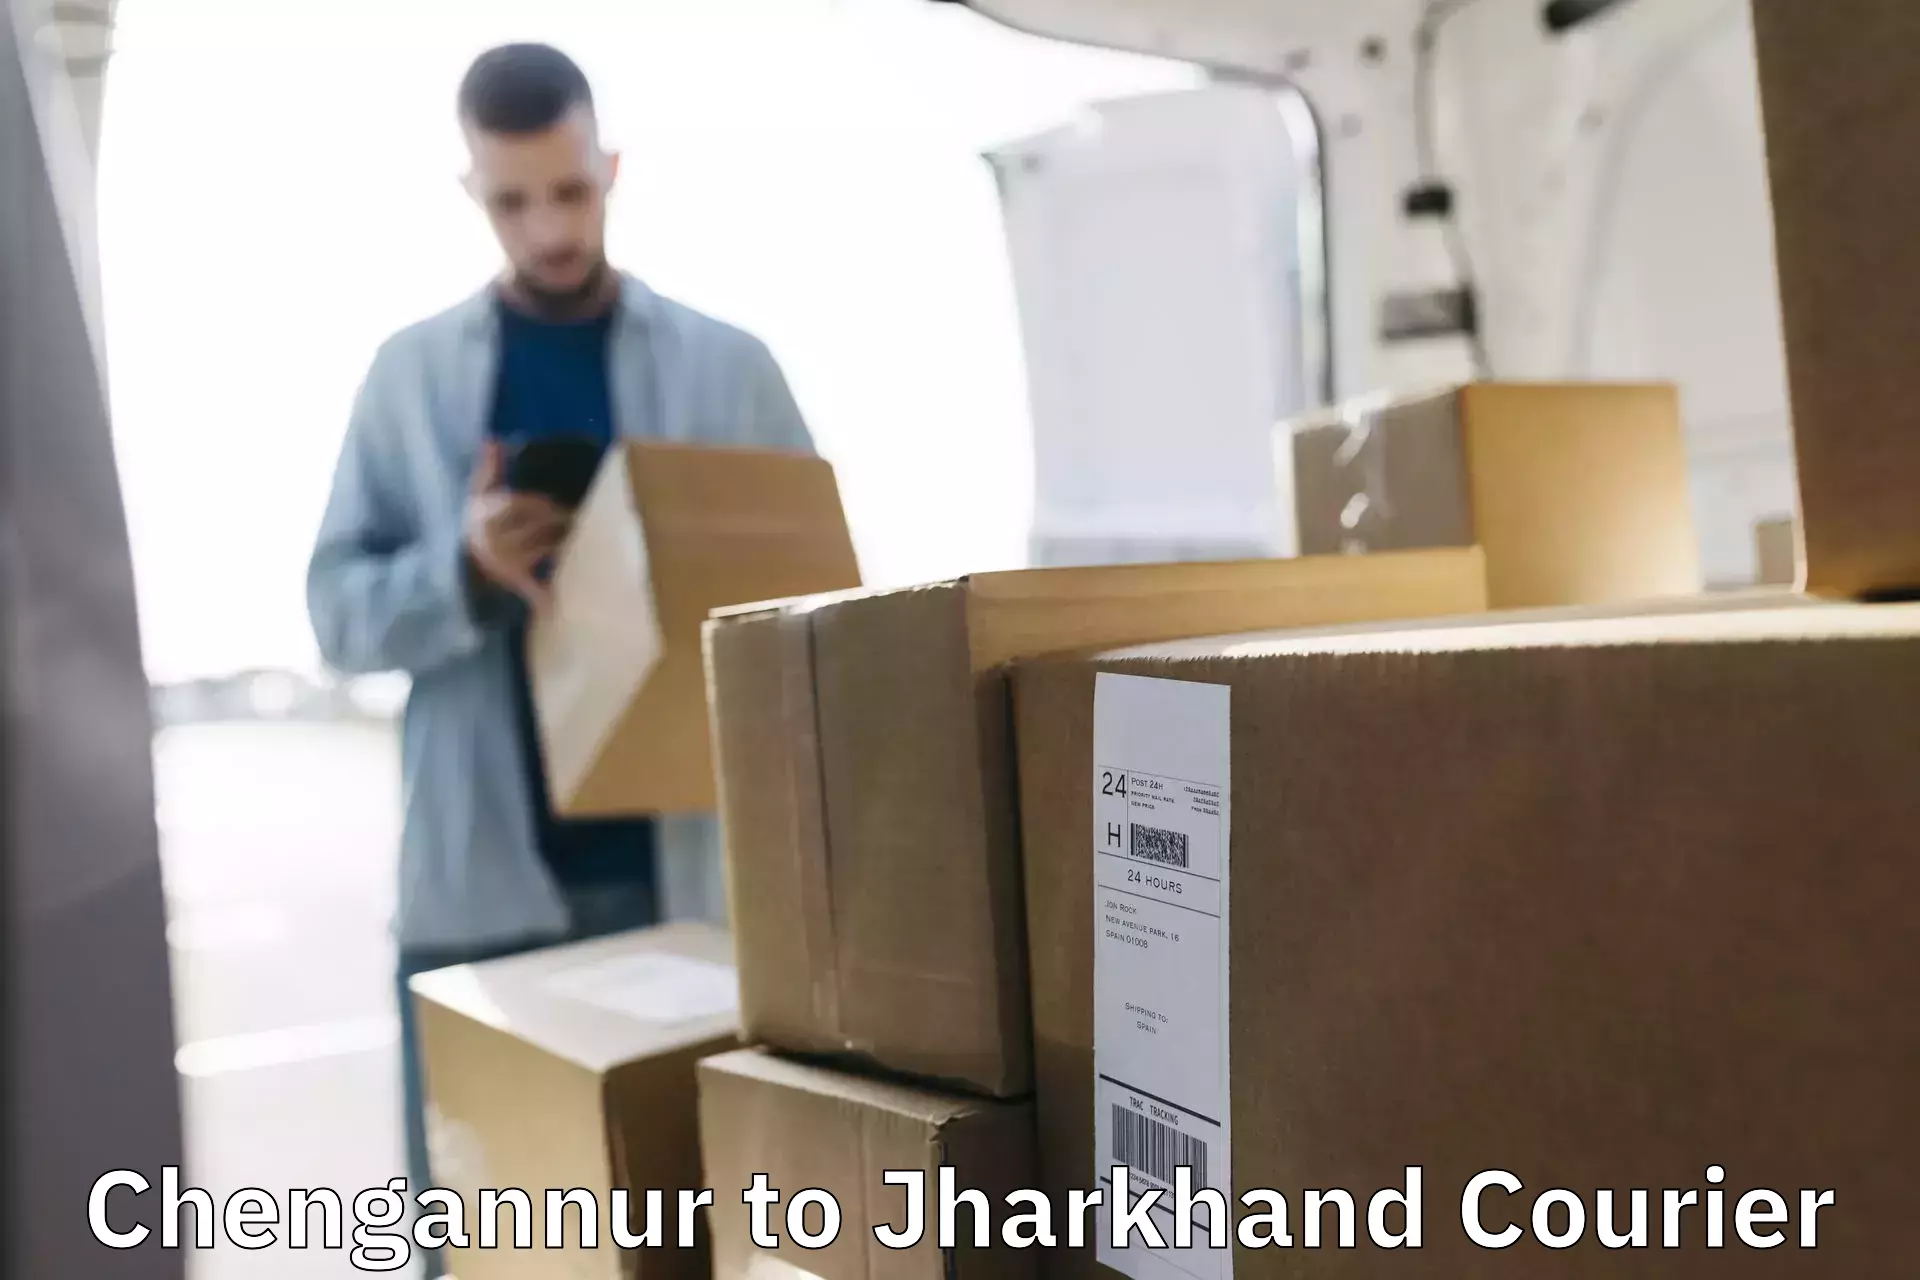 Global parcel delivery Chengannur to Dhanbad